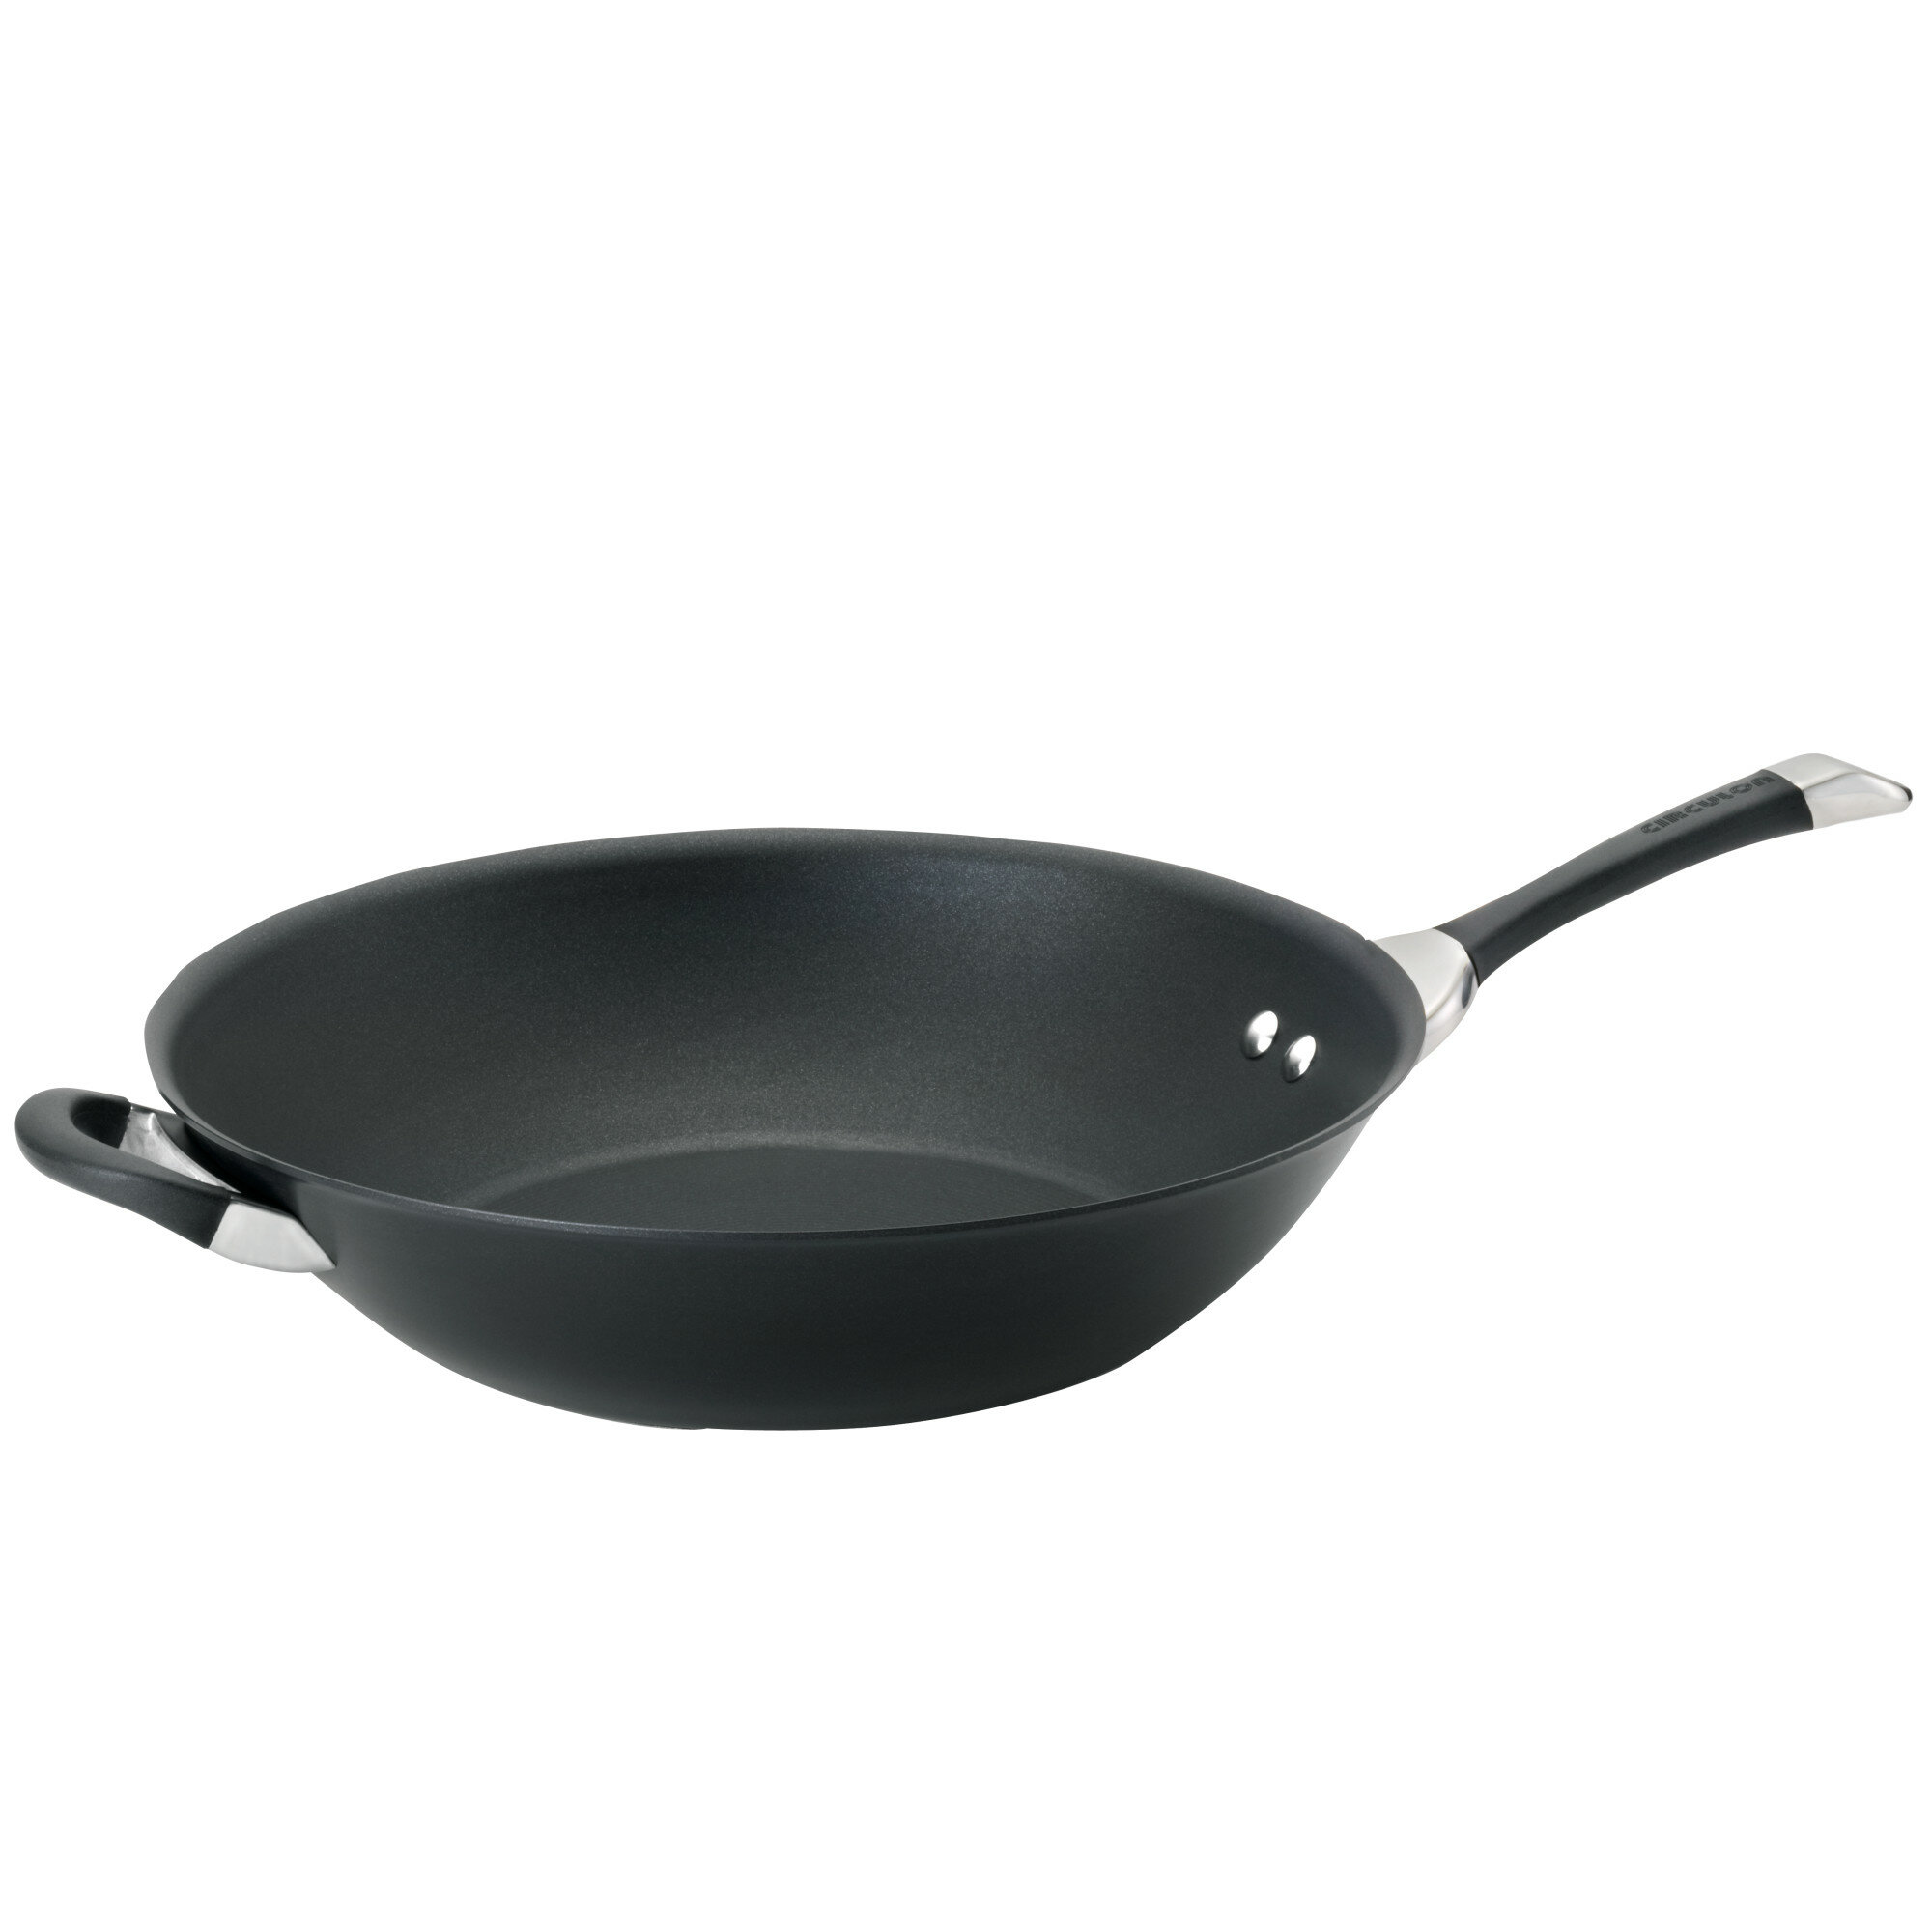 Anolon Advanced Home Hard-Anodized 14 Nonstick Wok with Side Handles